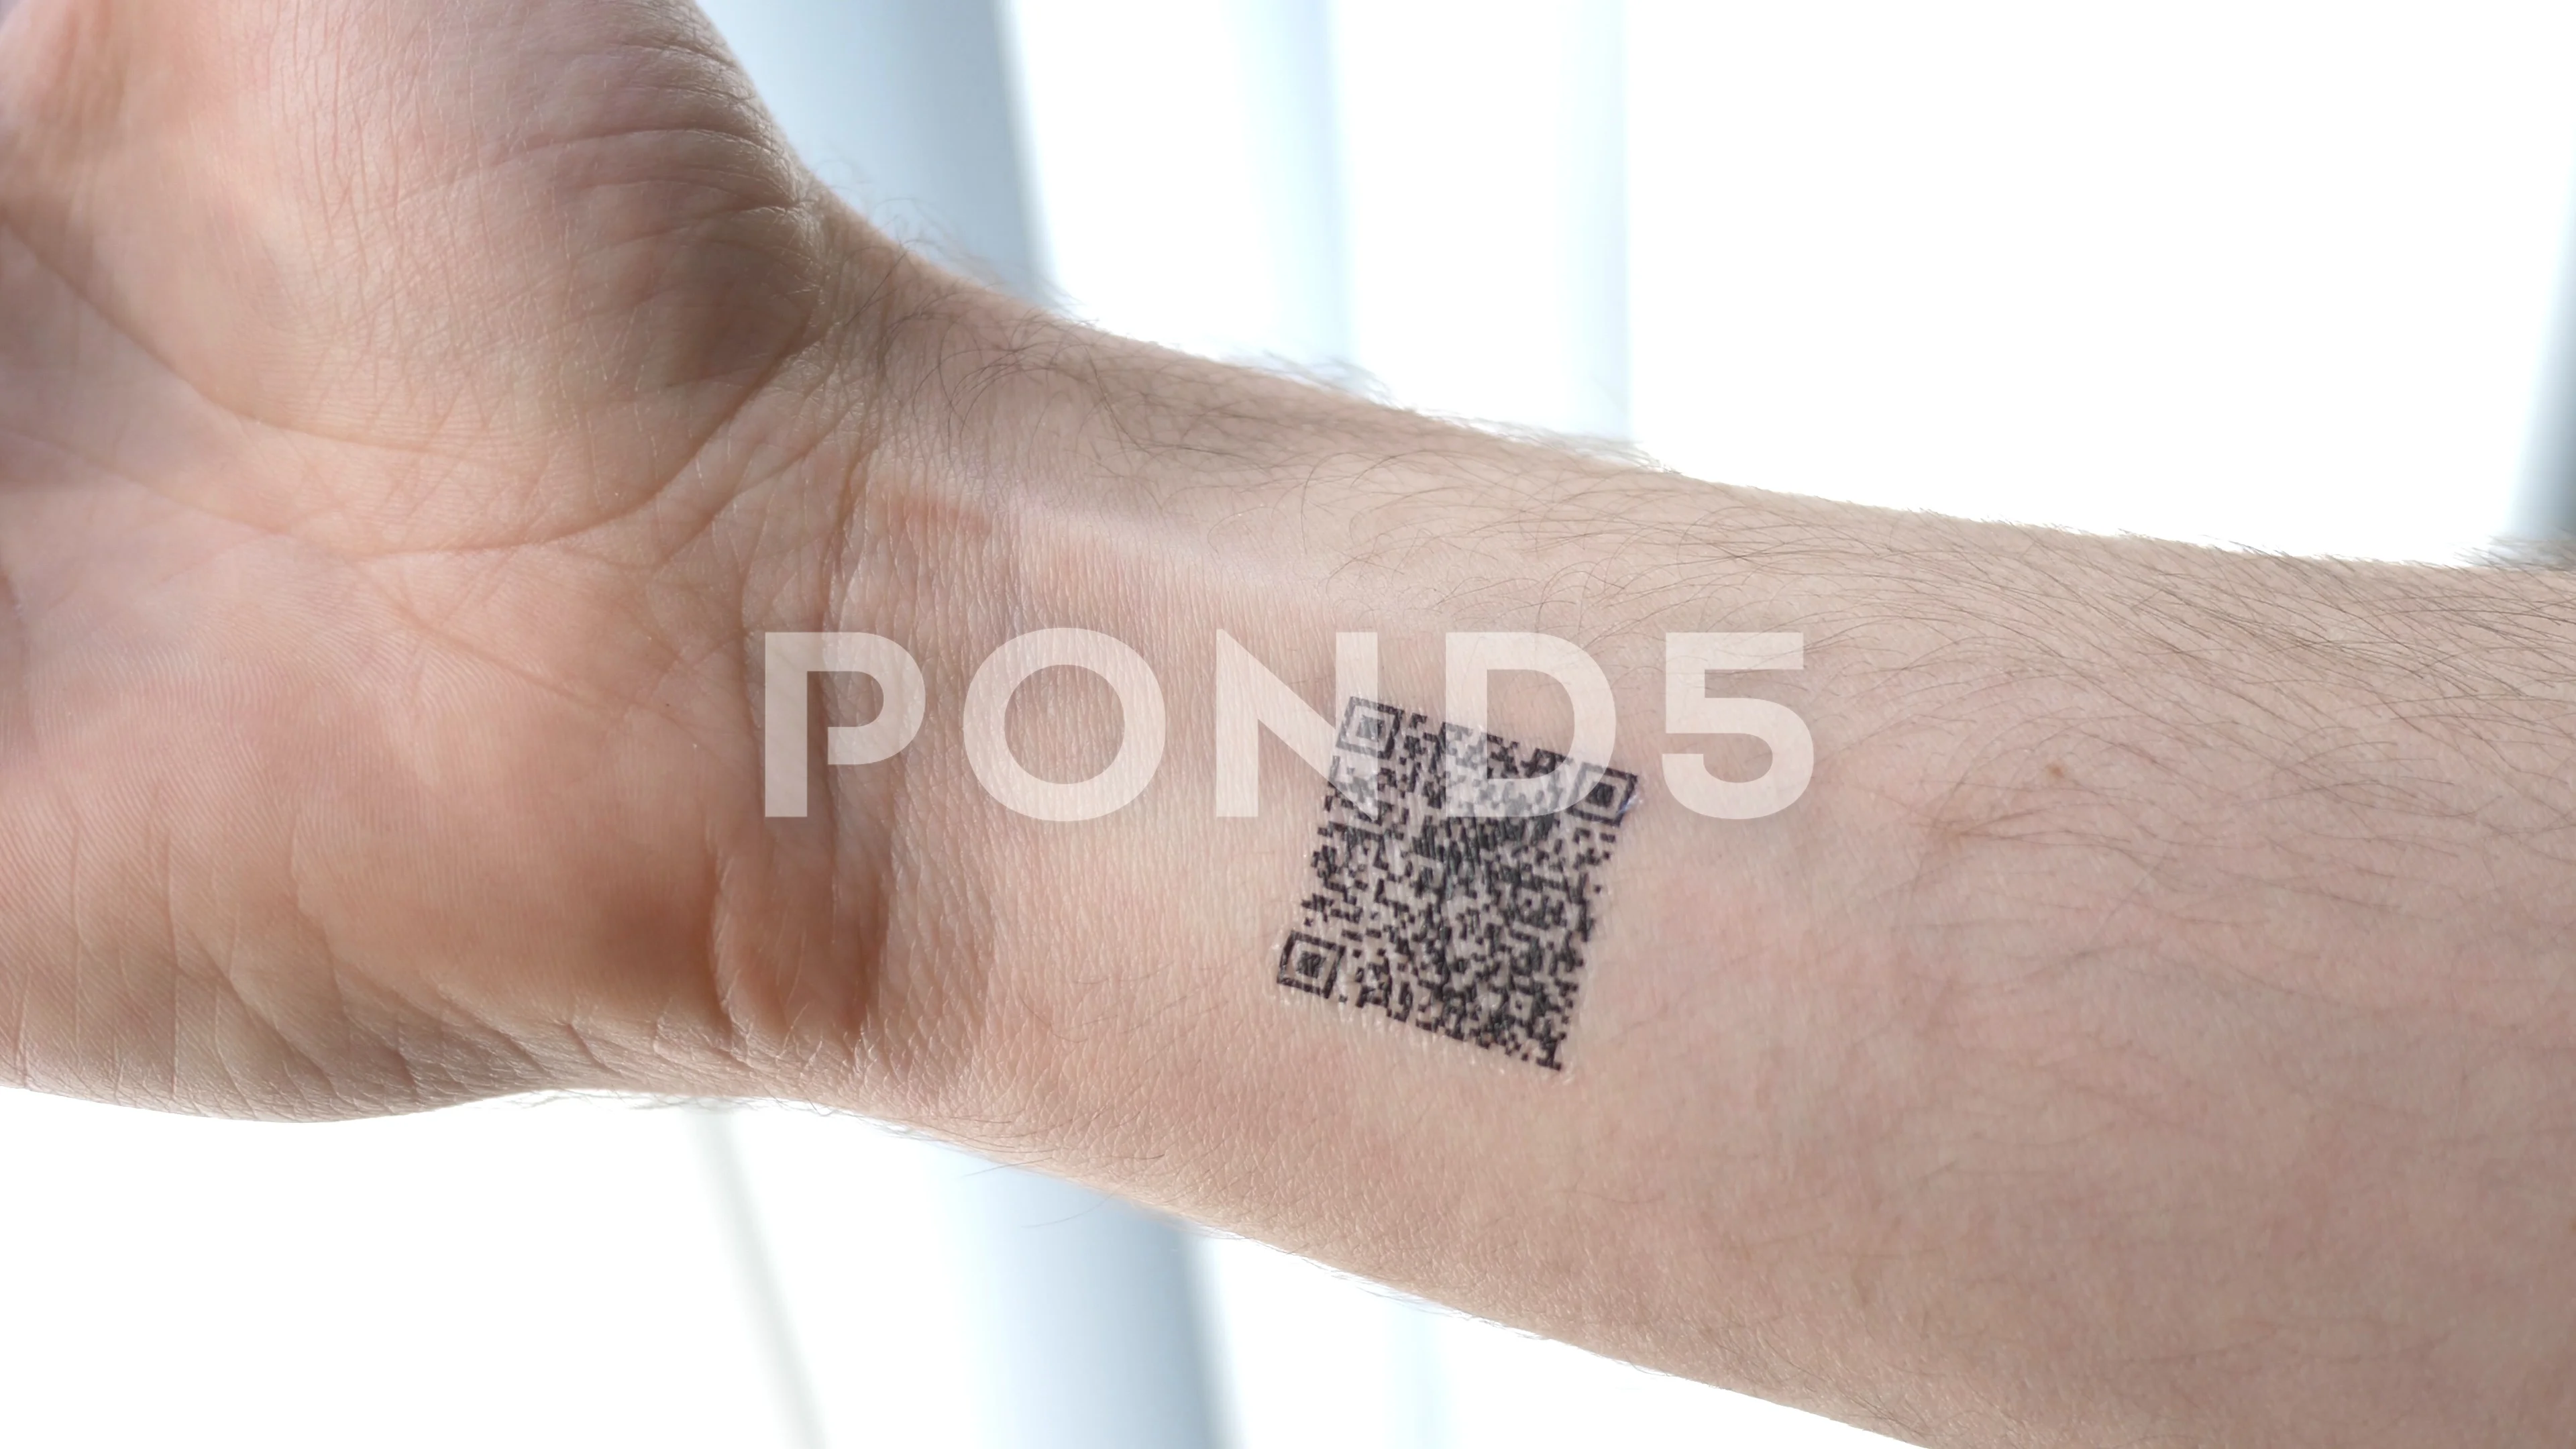 1,931 Tattoo Code Images, Stock Photos, 3D objects, & Vectors | Shutterstock